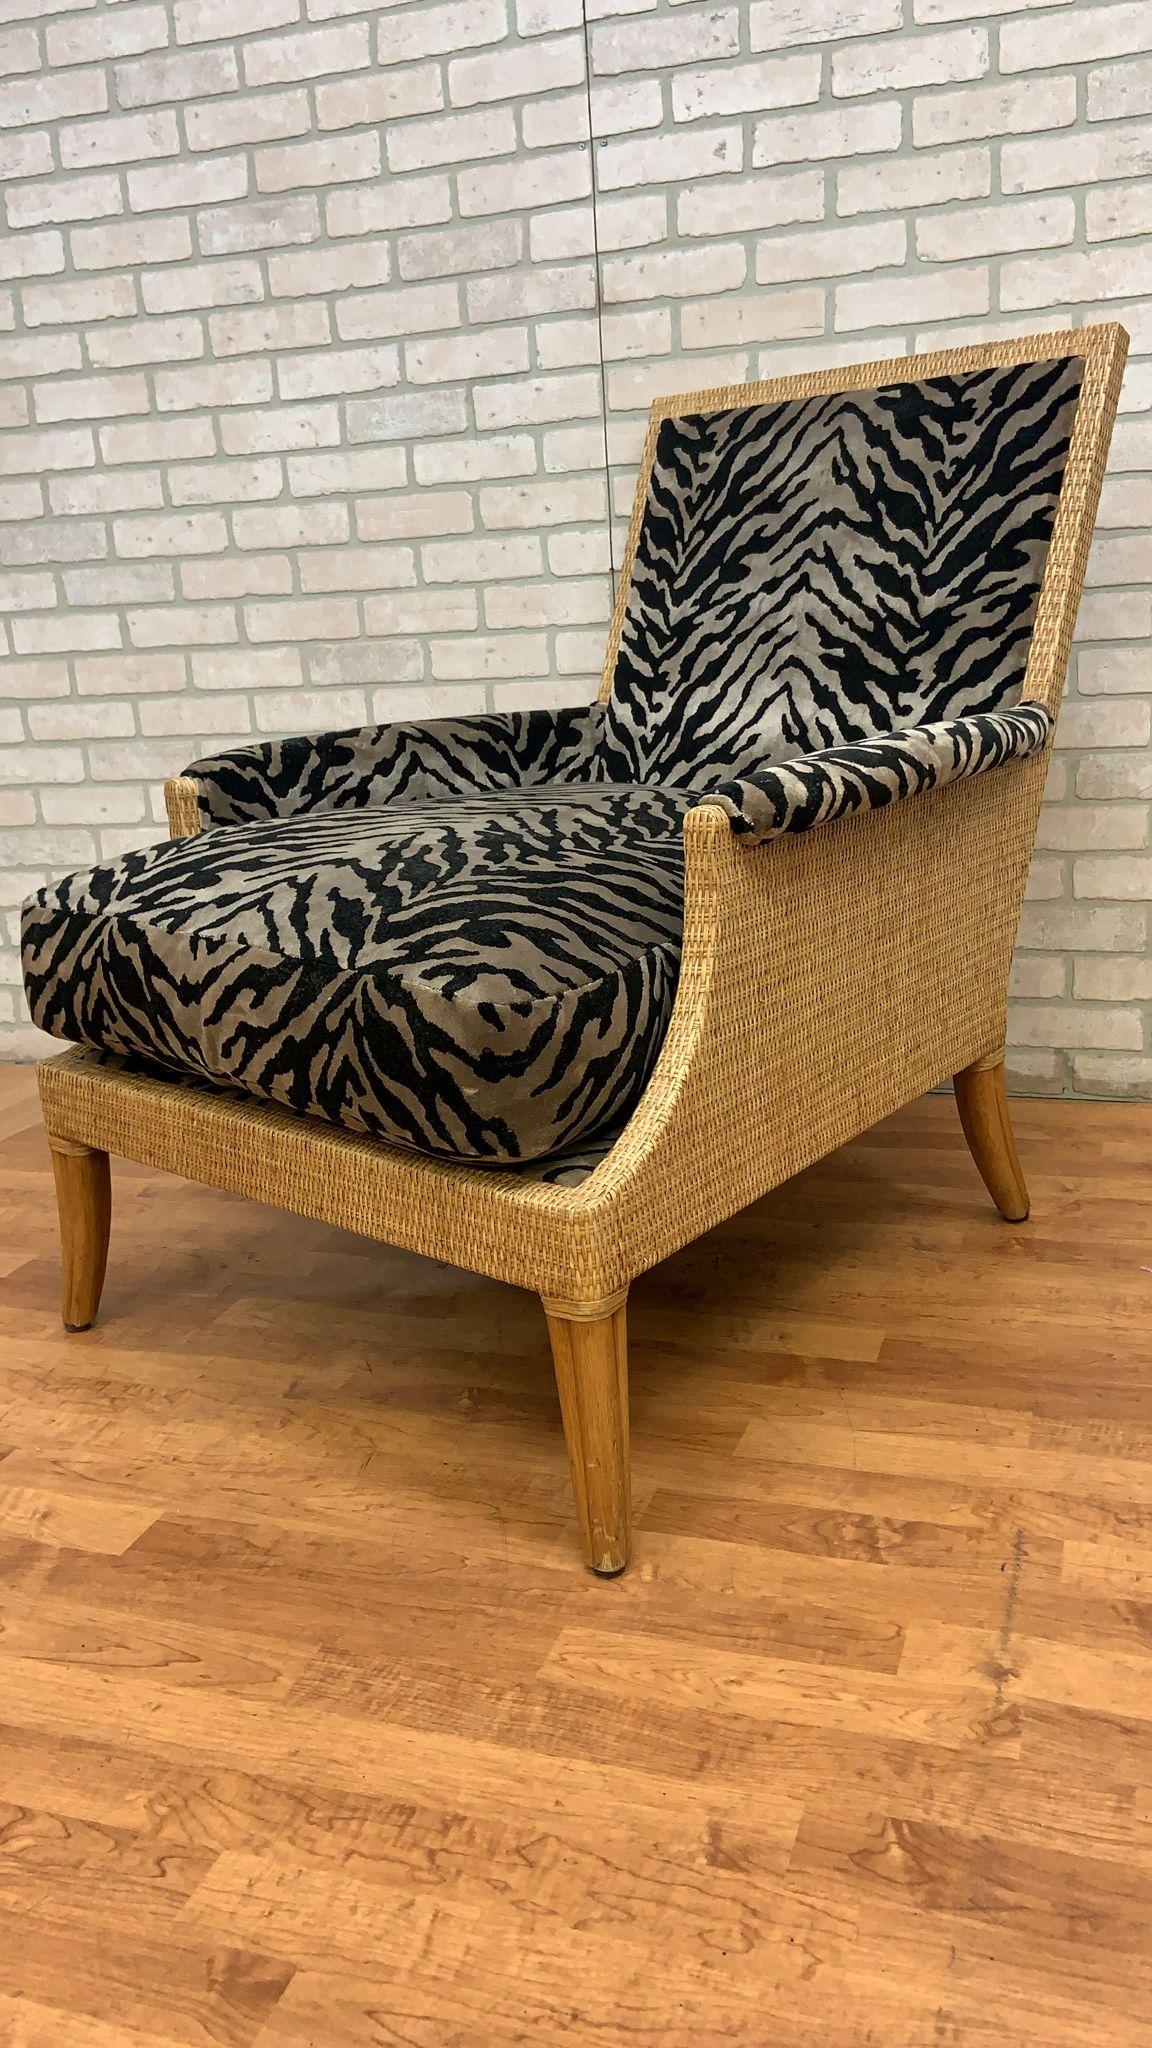 Mid-20th Century Vintage McGuire Rattan and Wicker Umbria Lounge Chair with Ottoman, 2 Piece Set